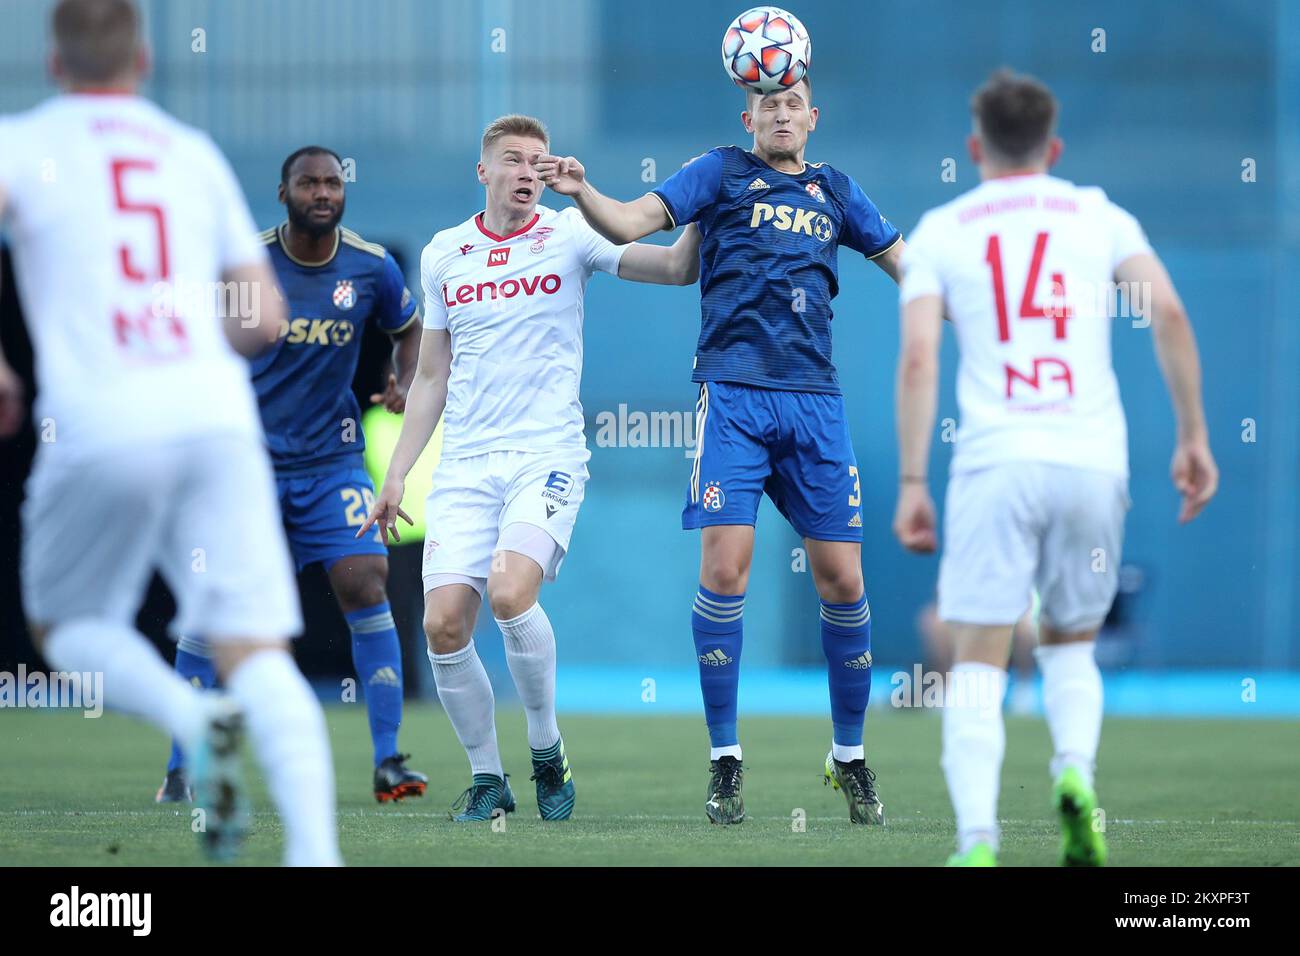 Daniel Stefulj of Dinamo Zagreb gets up for a header during UEFA Champions League First Qualifying Round match between GNK Dinamo Zagreb and Valur at Maksimir Stadium in Zagreb, Croatia on July 7, 2021. Photo: Igor Kralj/PIXSELL Stock Photo